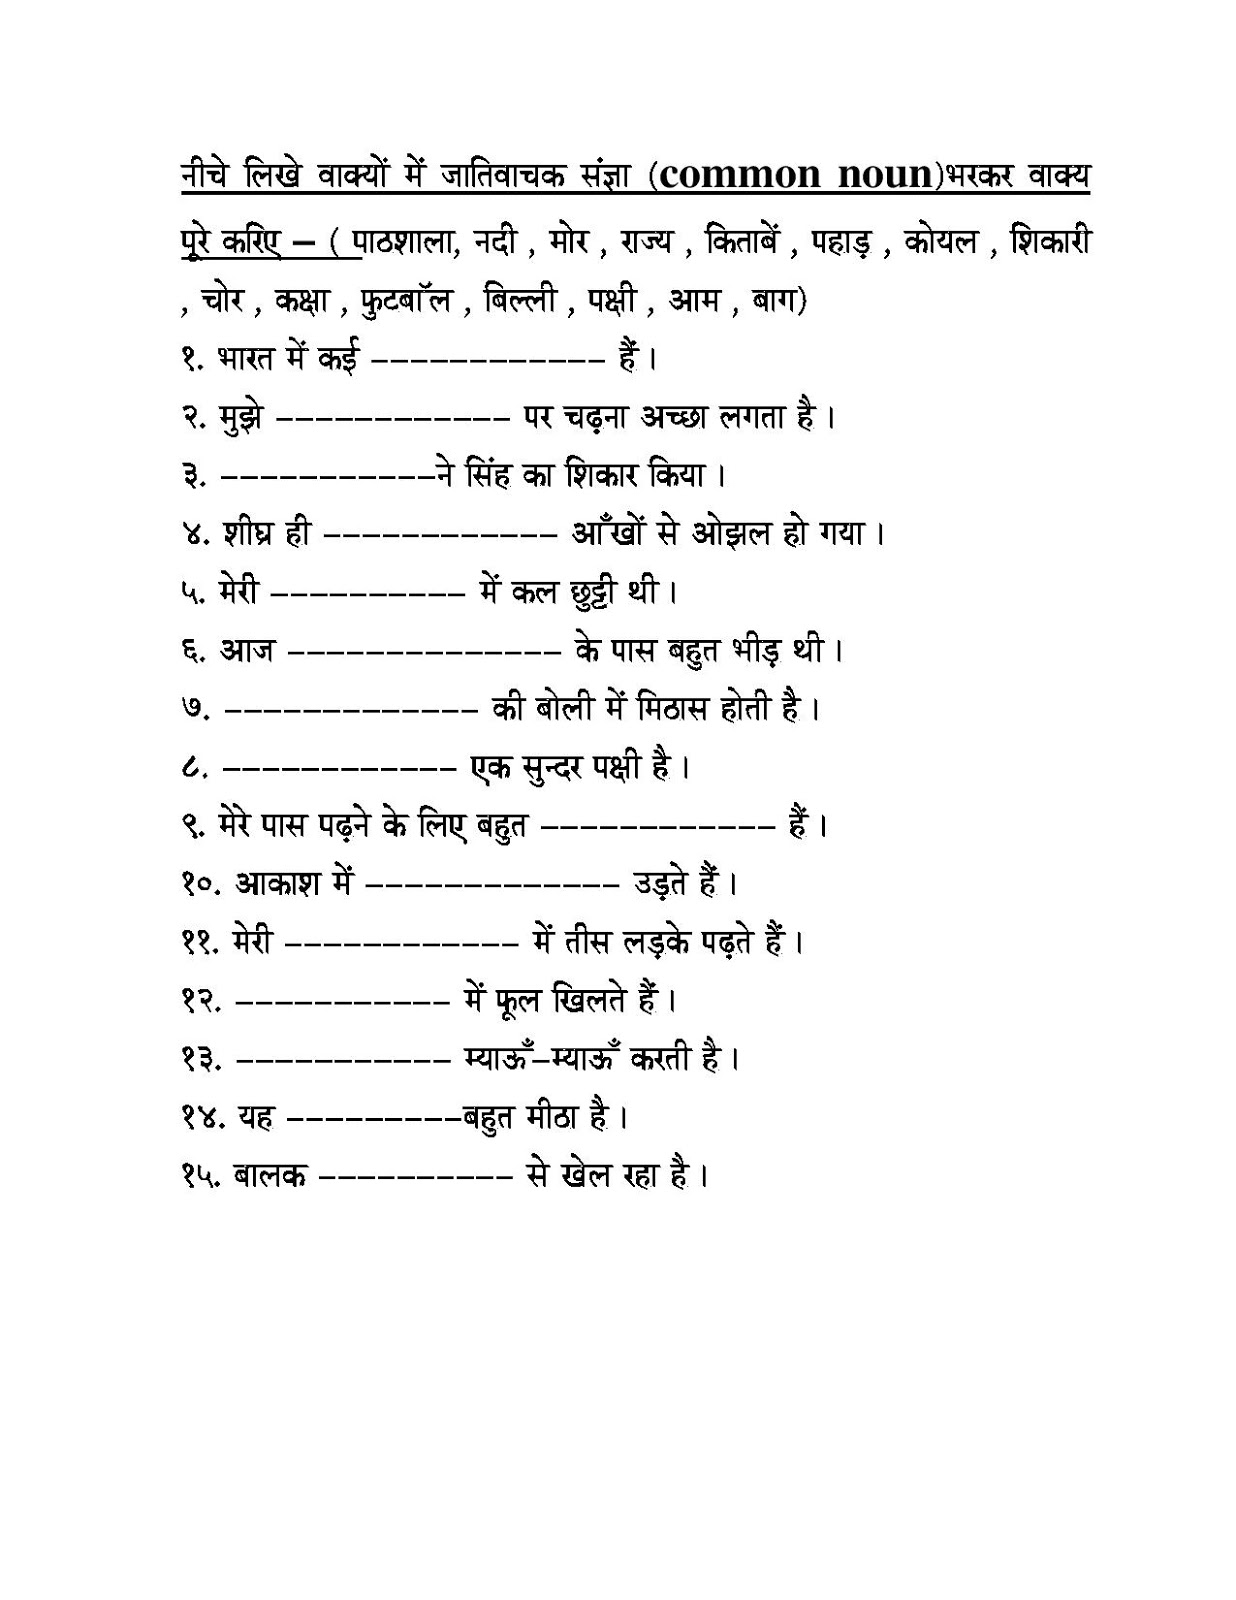 5th Grade Hindi Grammar Worksheets For Class 5 With Answers TUTORE 